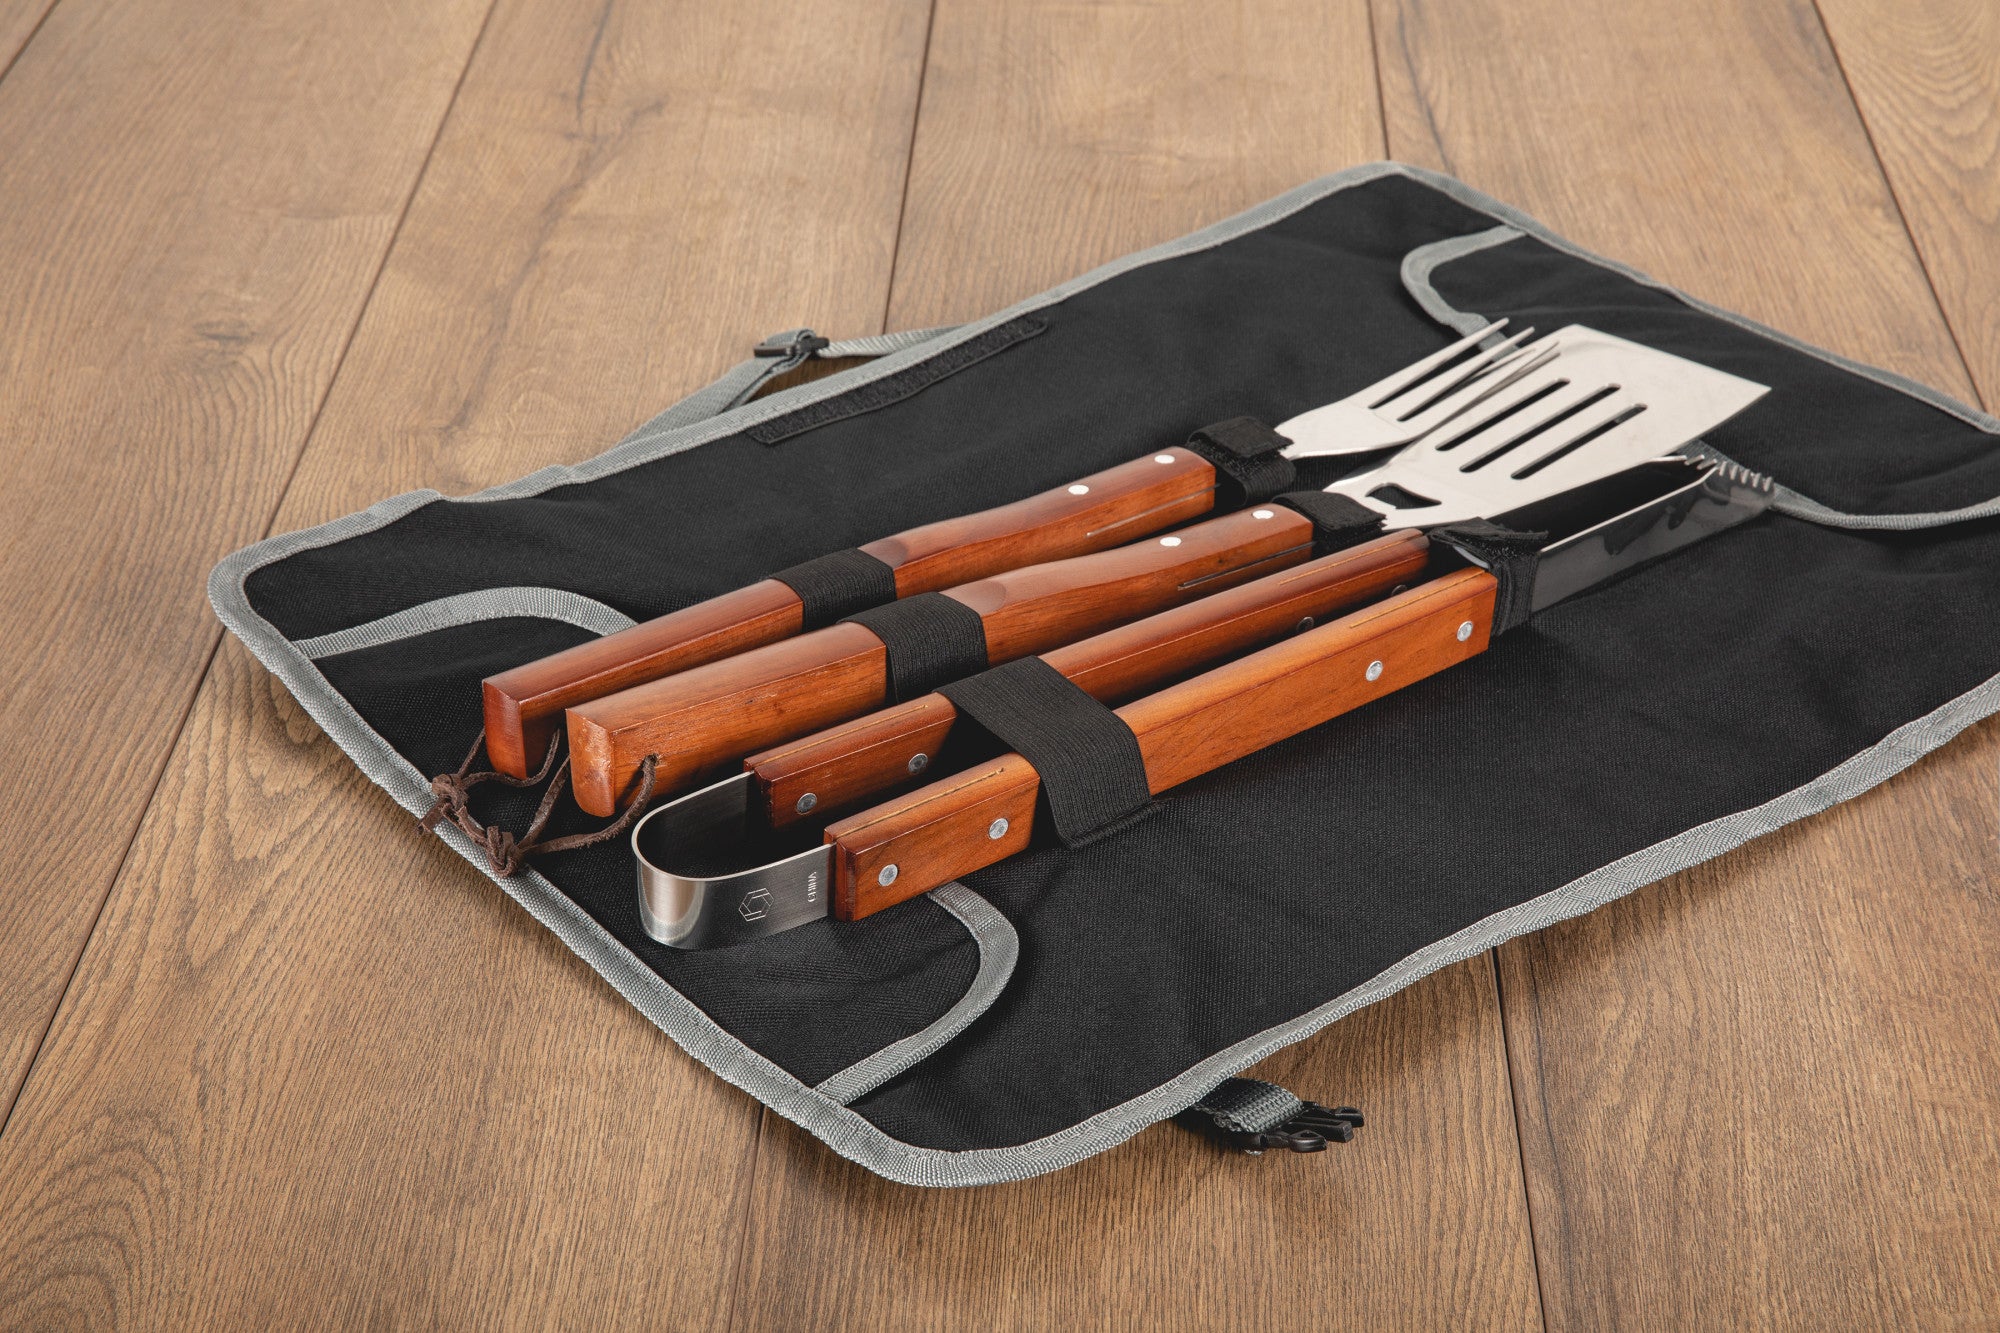 San Francisco 49ers - 3-Piece BBQ Tote & Grill Set